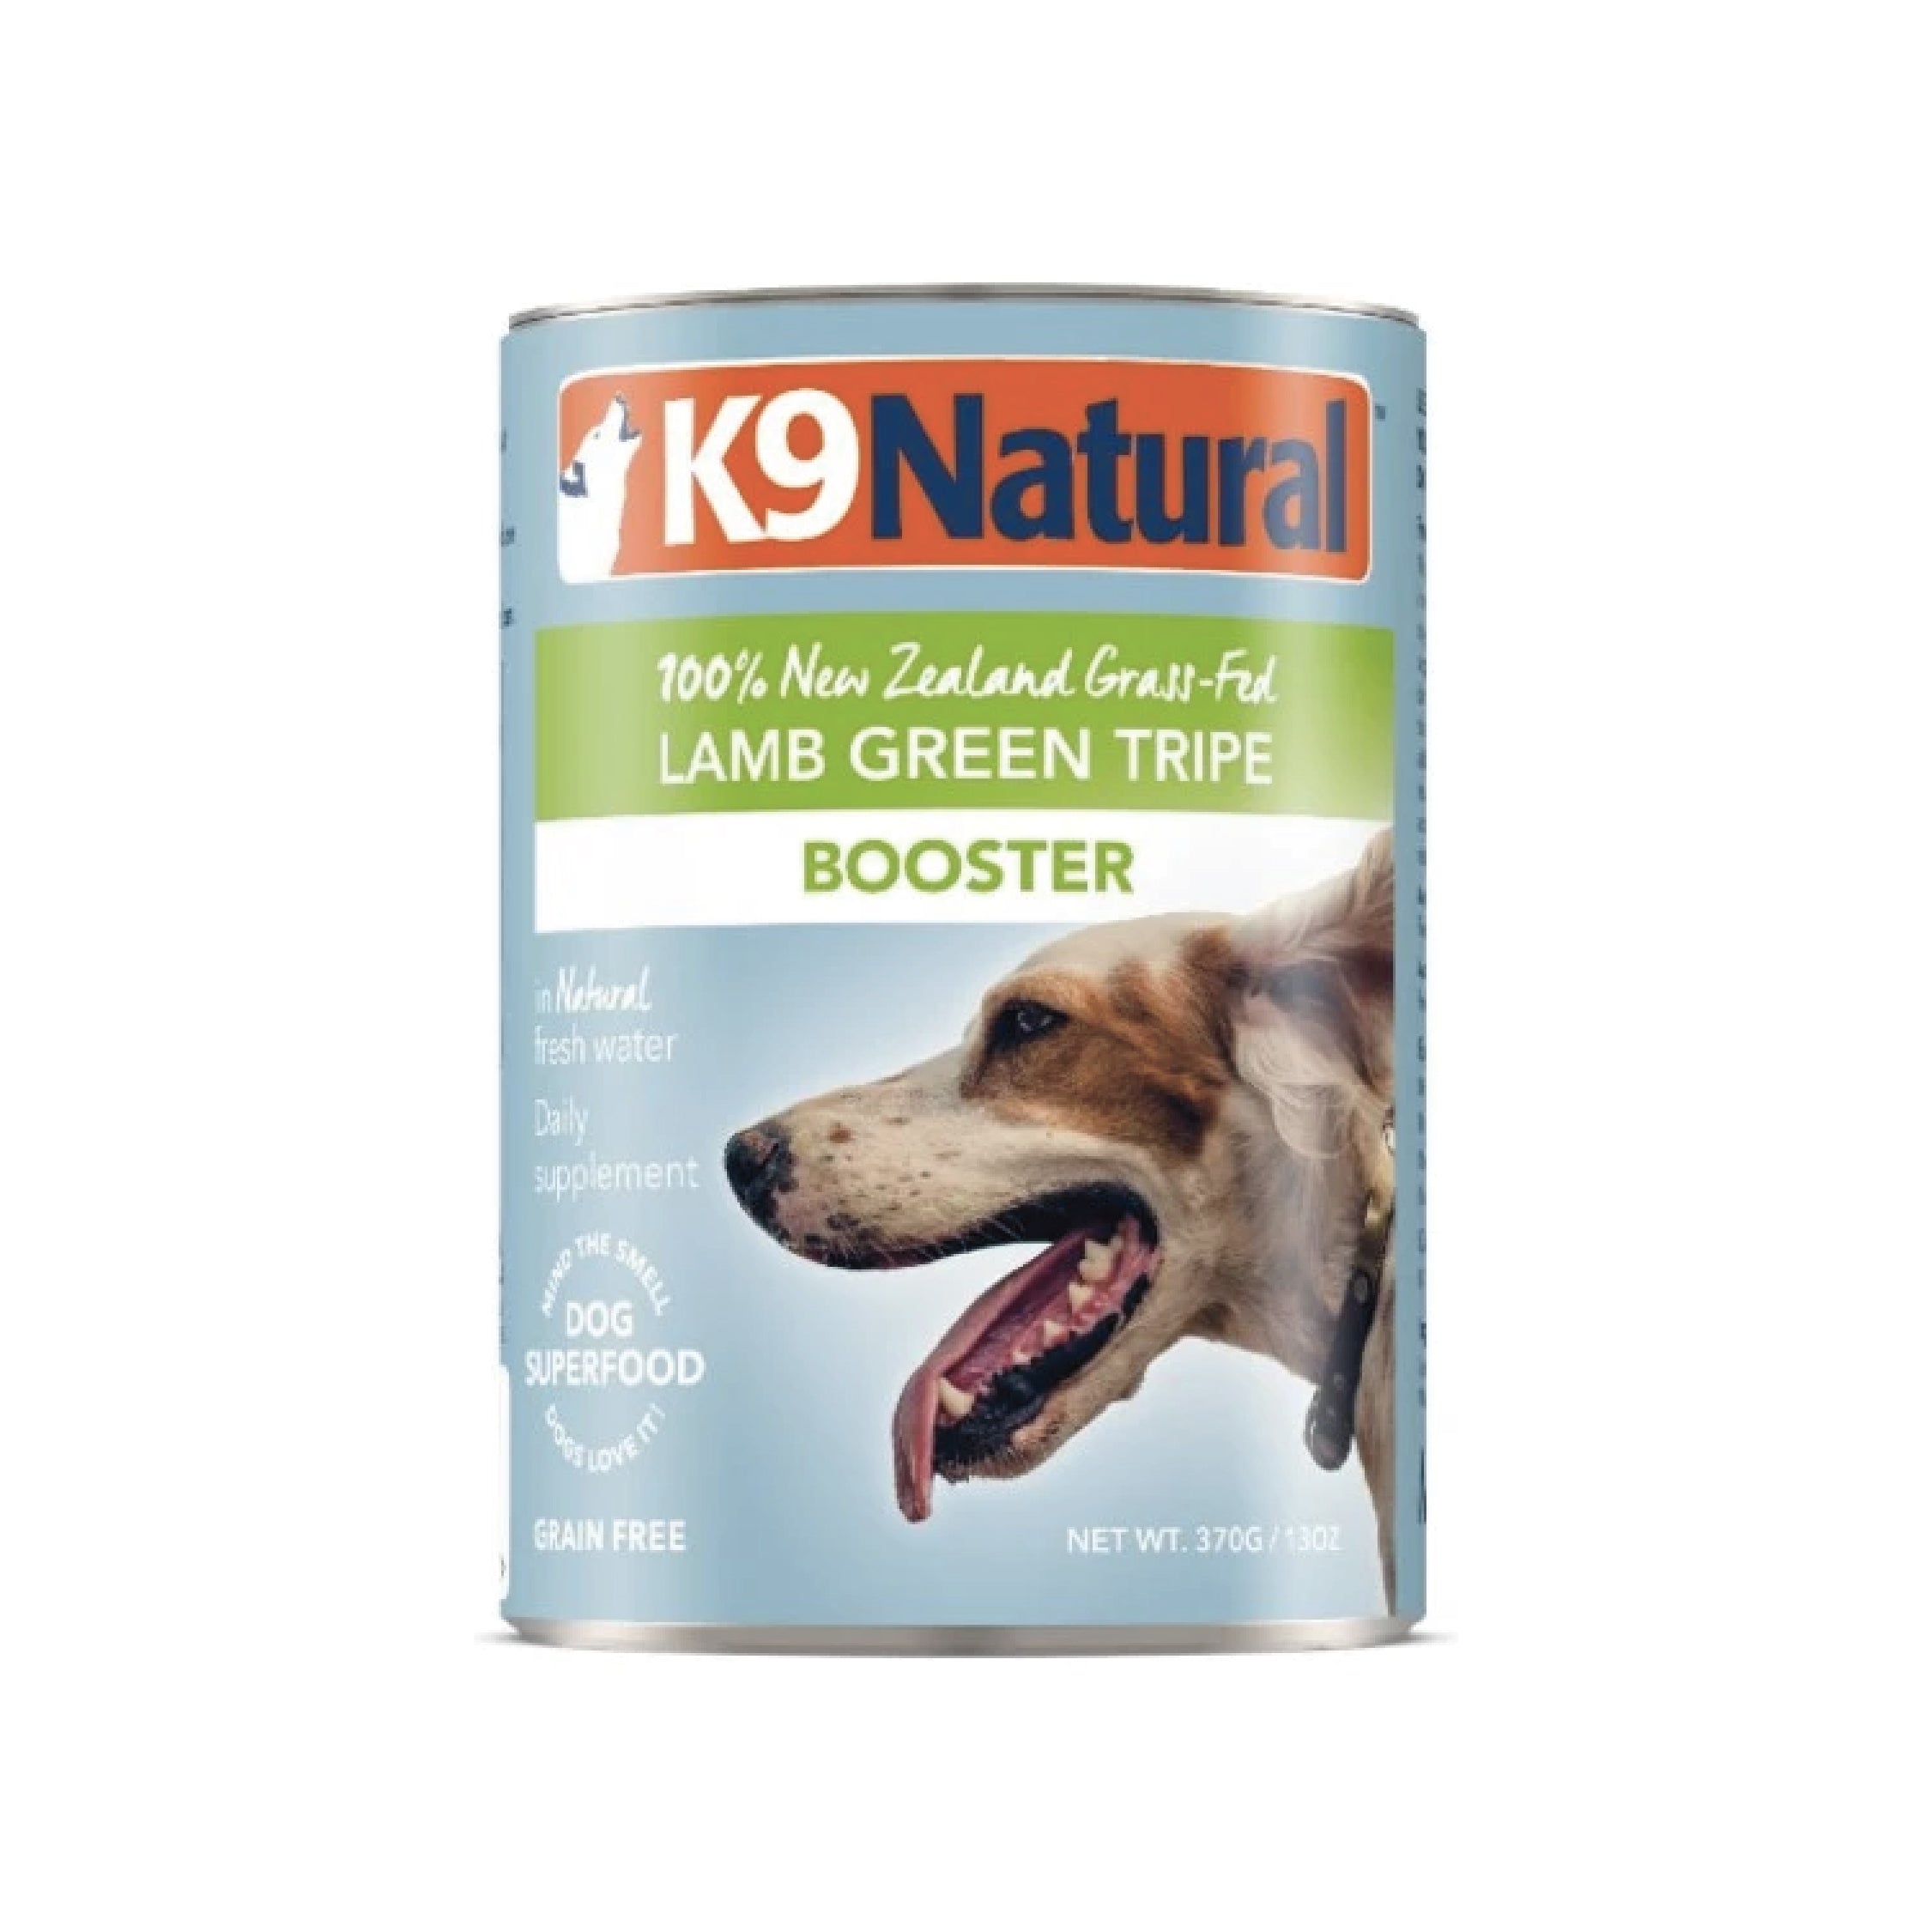 K9 Natural Lamb Green Tripe Booster Canned Dog Food